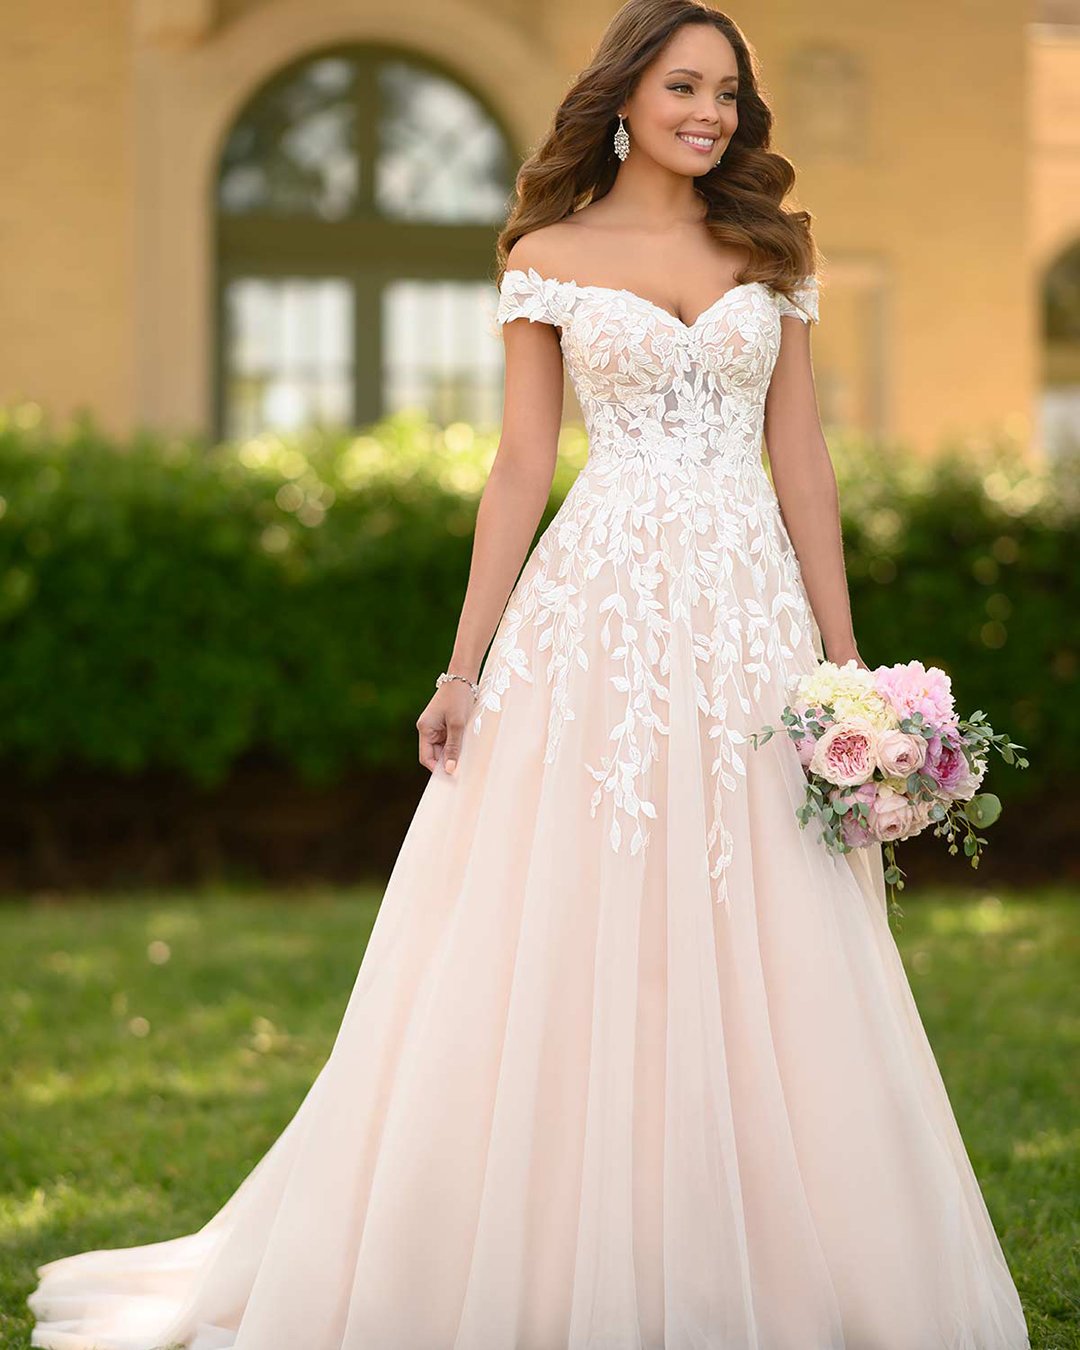 A-Line Wedding Dresses 2020/2021 Collections Overview